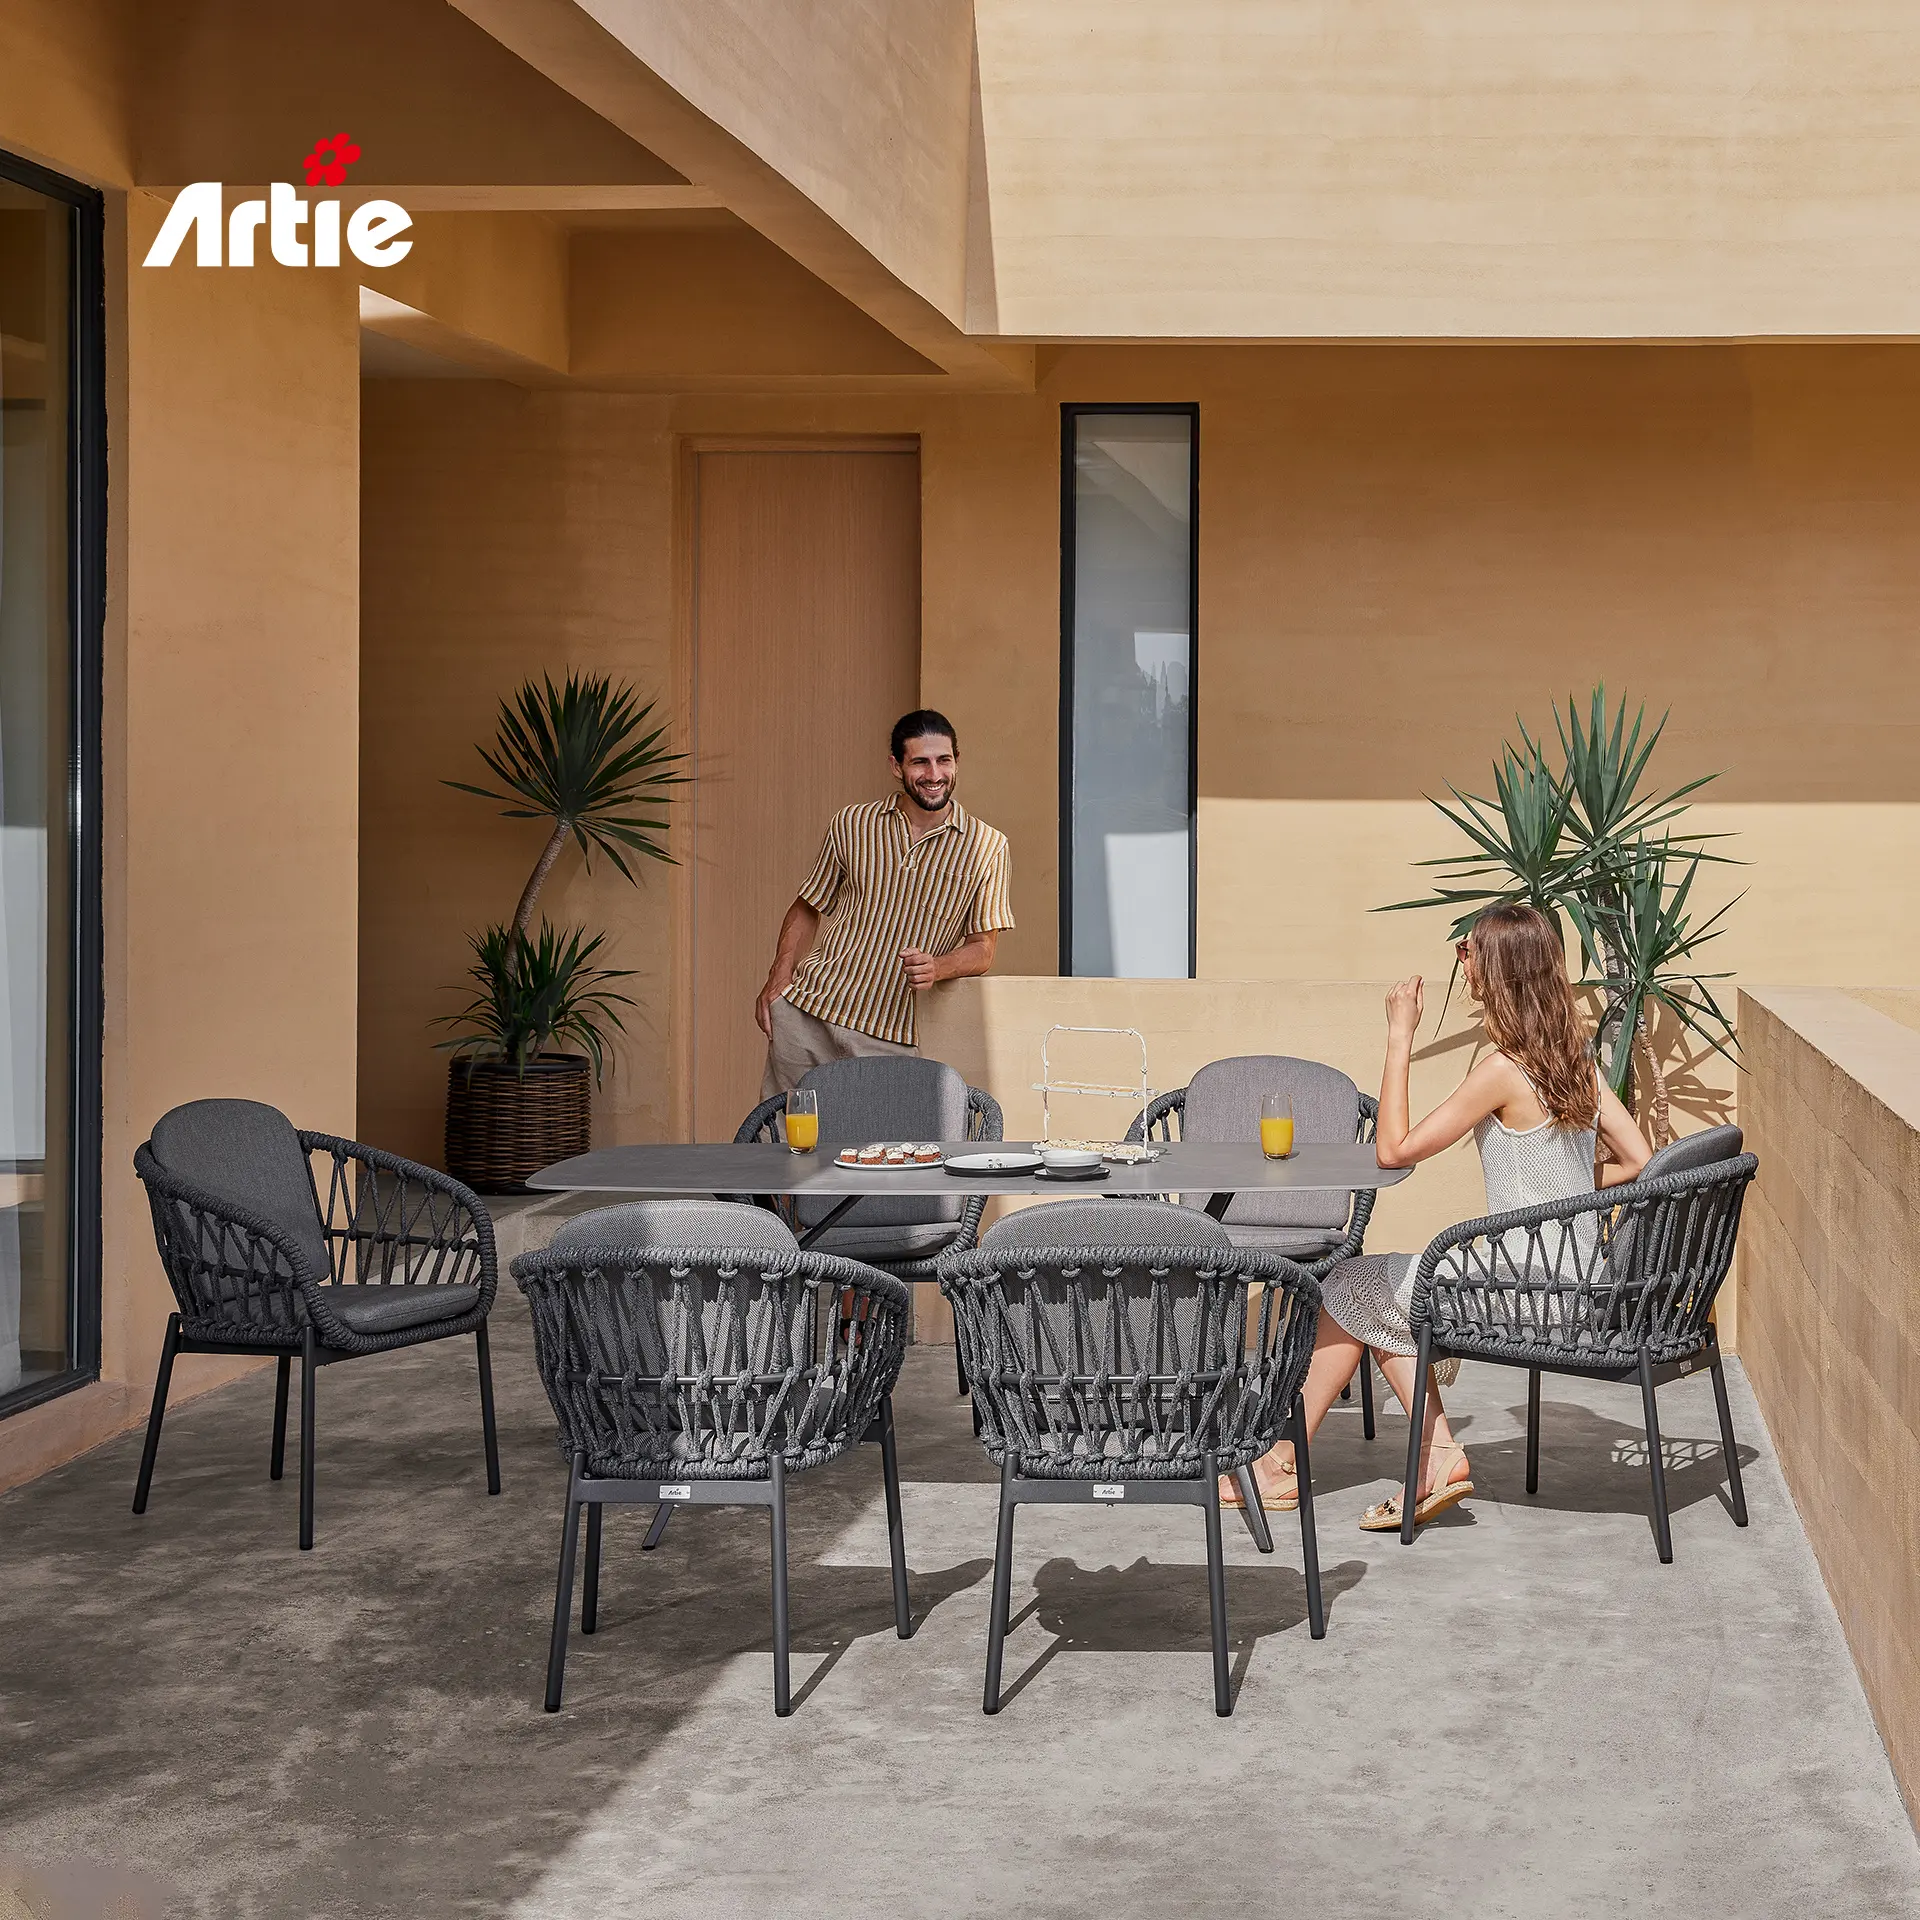 Artie Outdoor Restaurant Furniture Dining Set Modern Durable Aluminum Garden Dining Table And Chairs